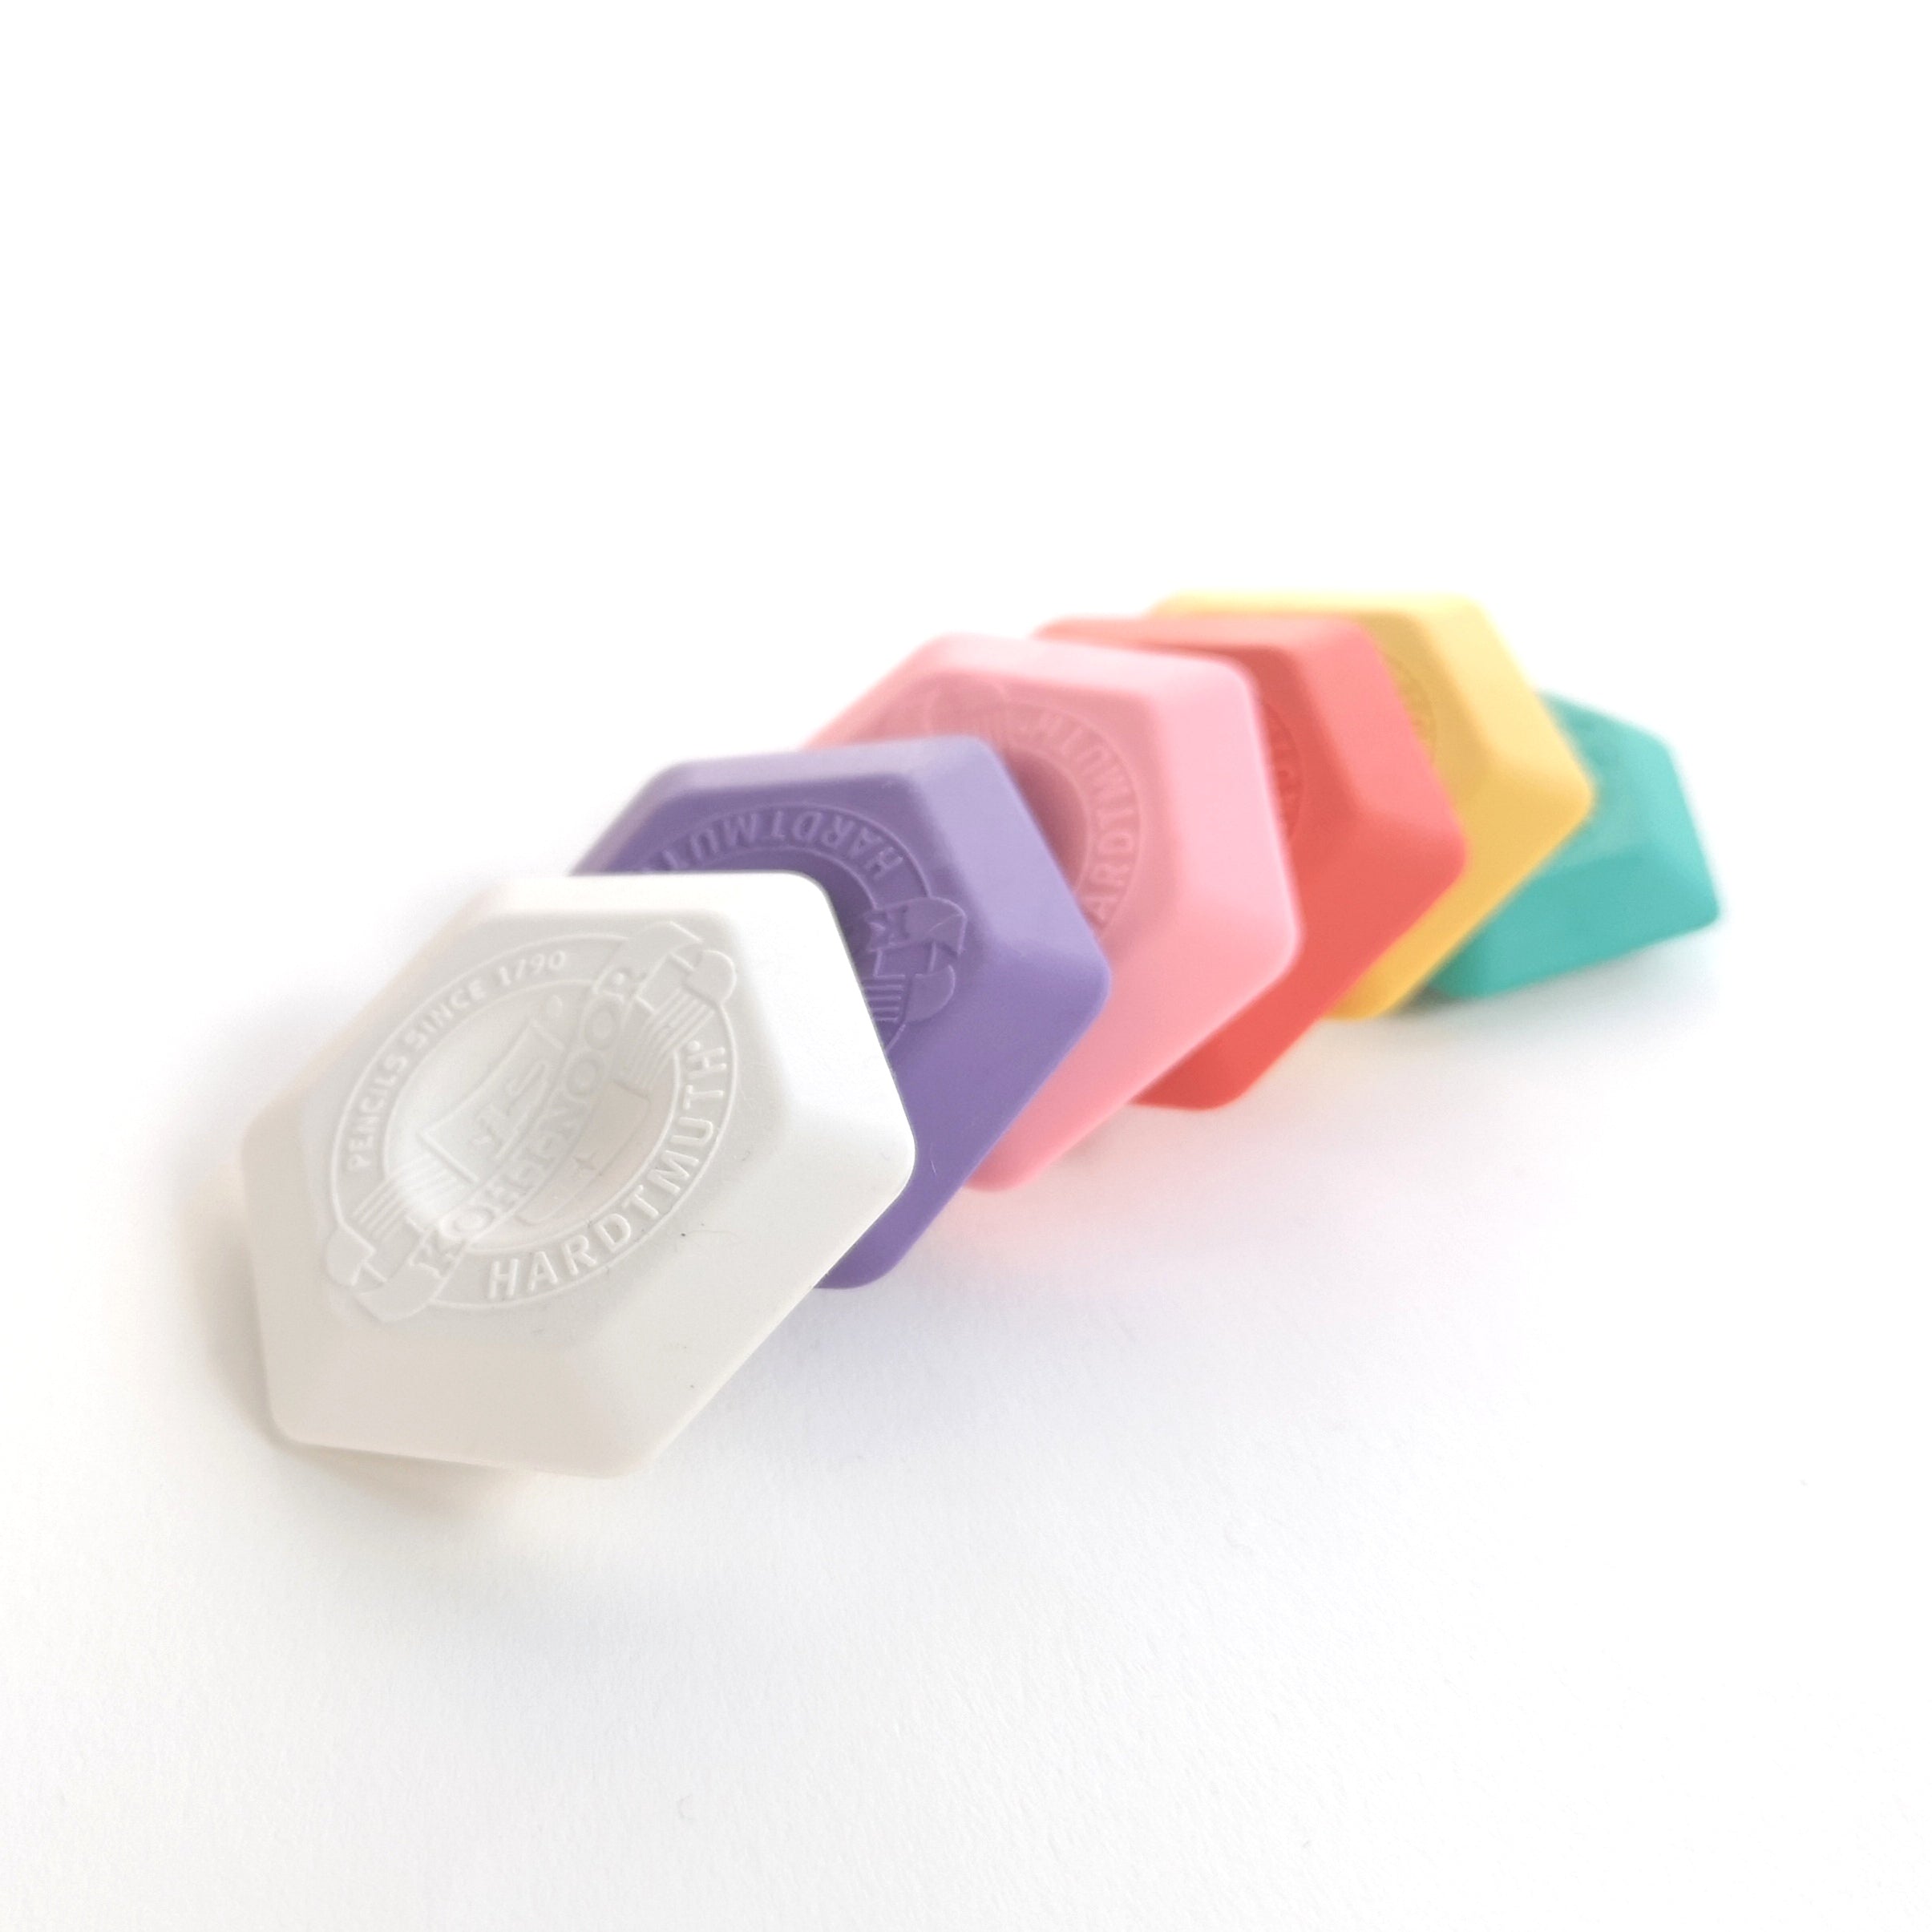 Selection of Hexagonal rubbers in white, purple, pink, red, yellow, and green